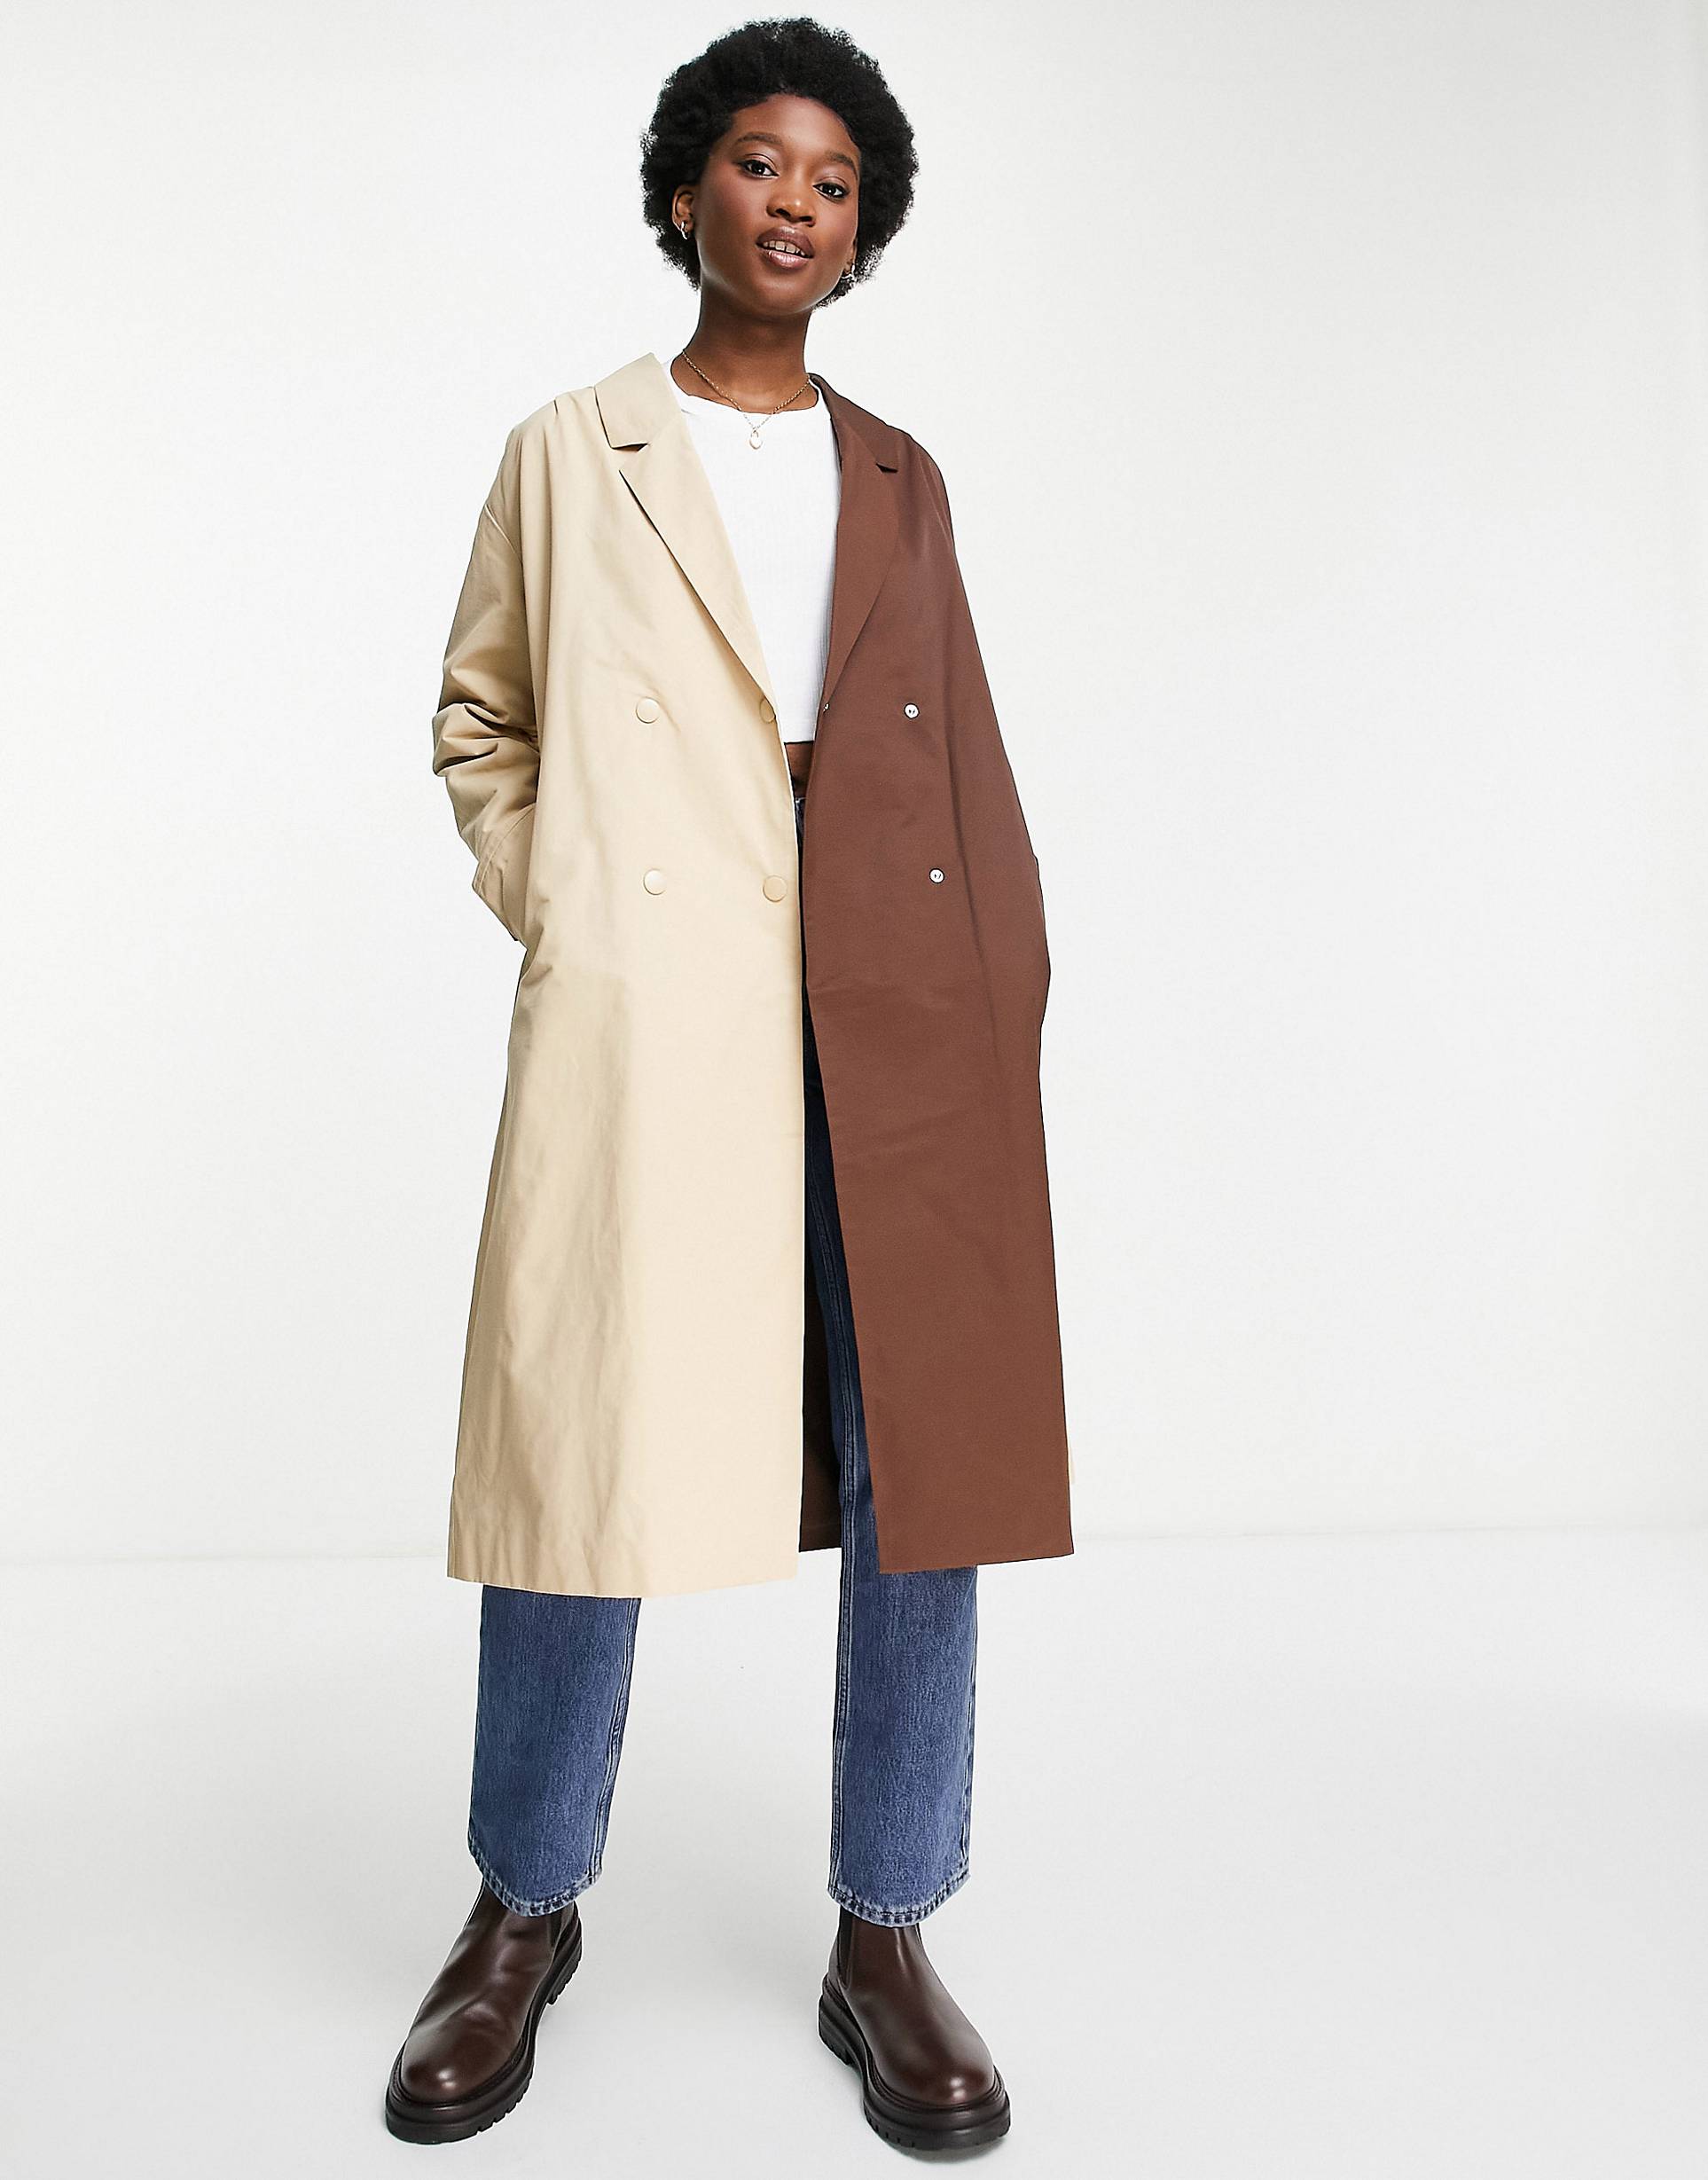 Beige & Brown Trench Coat from Pimkie.